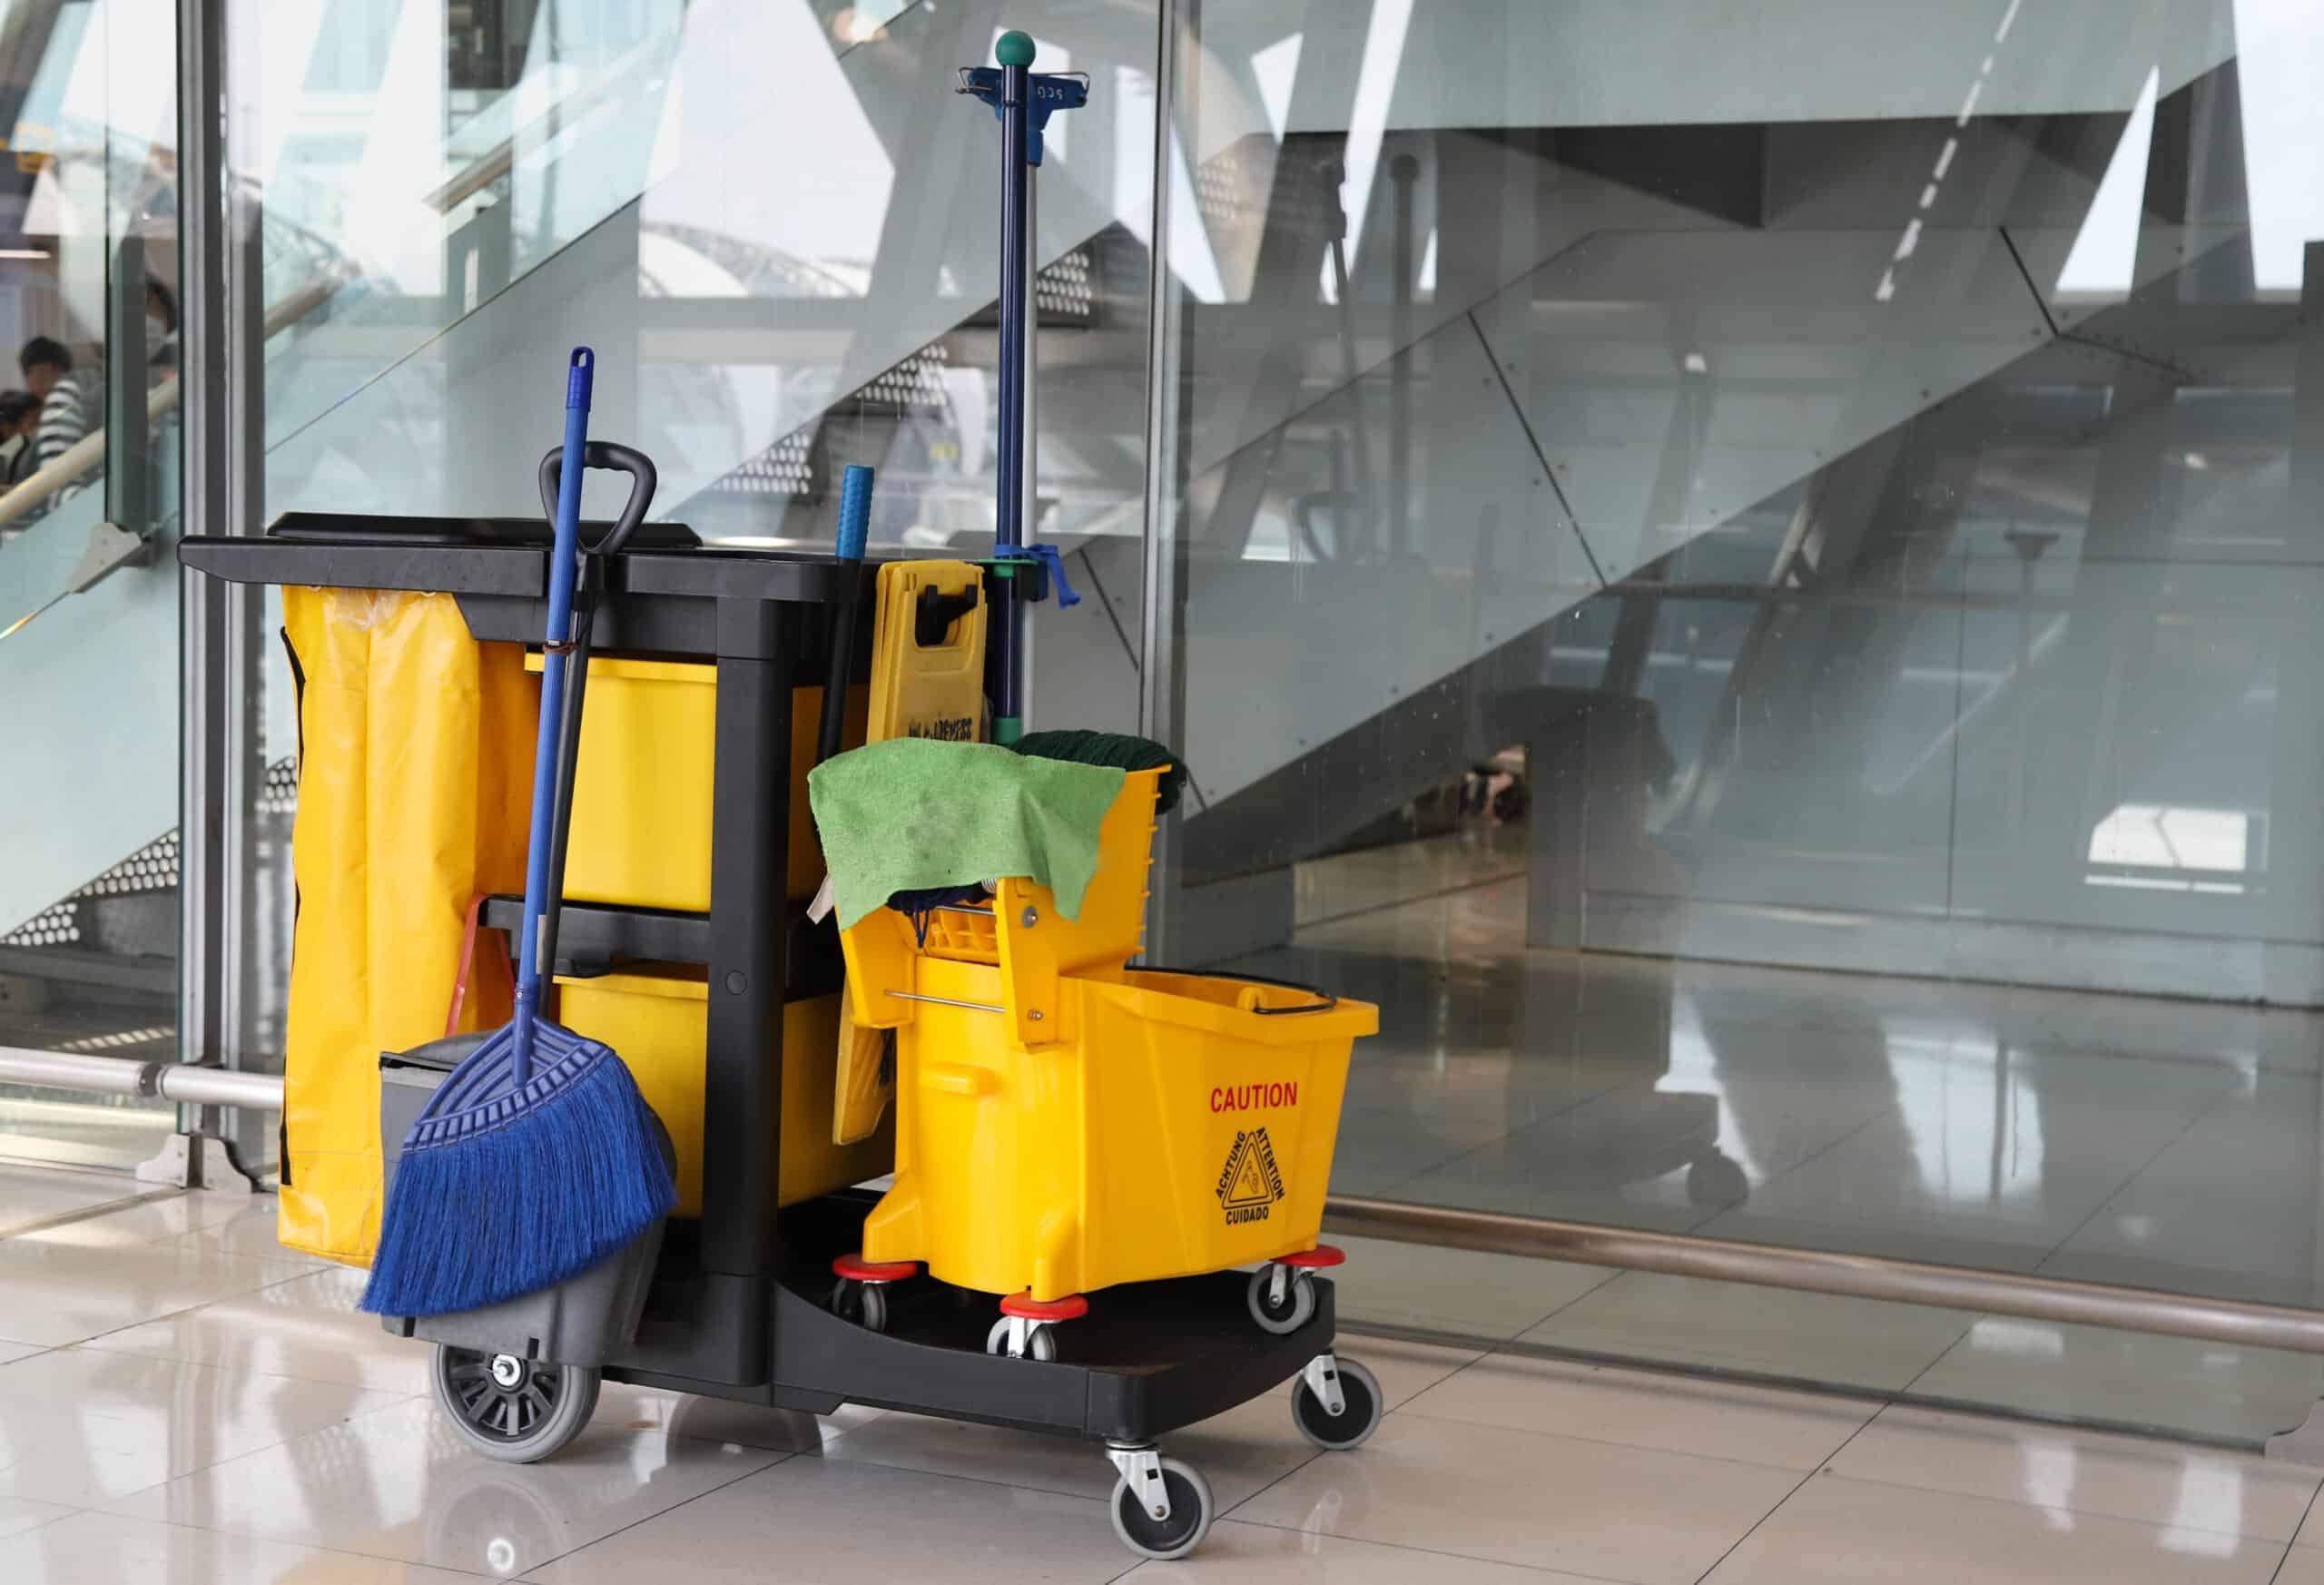 Janitorial Services Companies Los Angeles